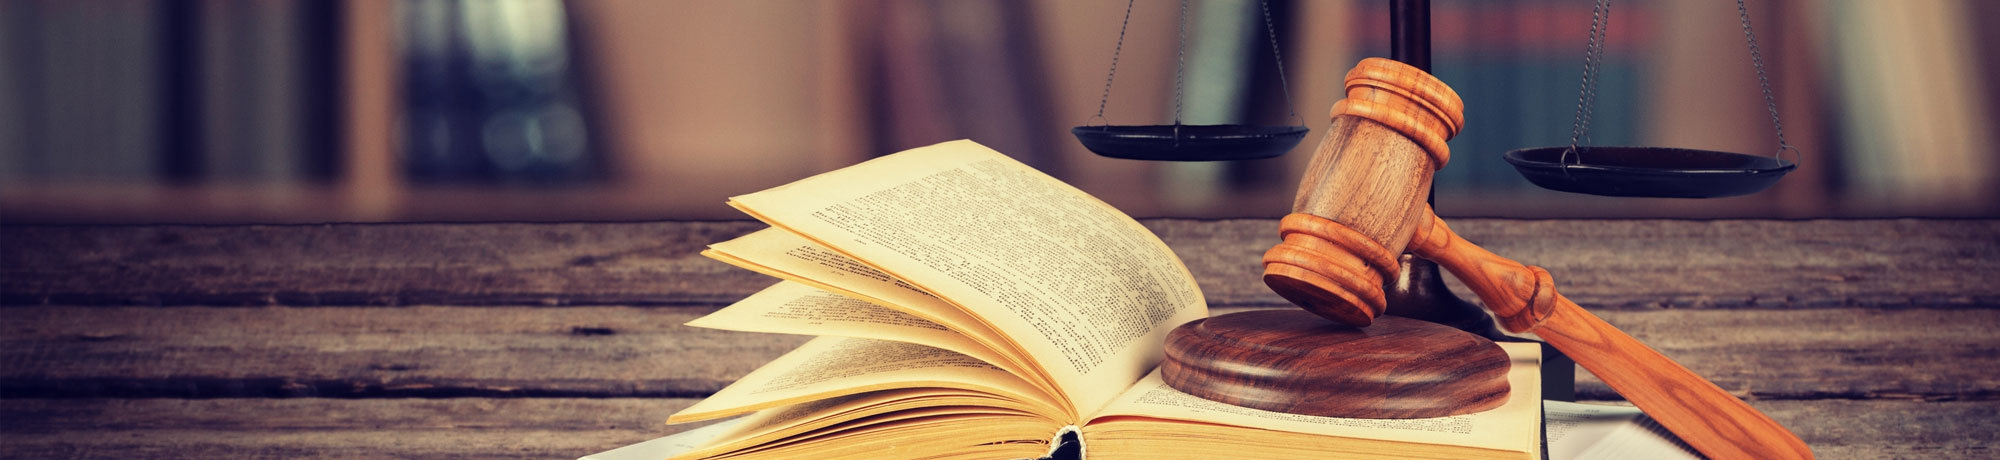 Legal Book and Gavel